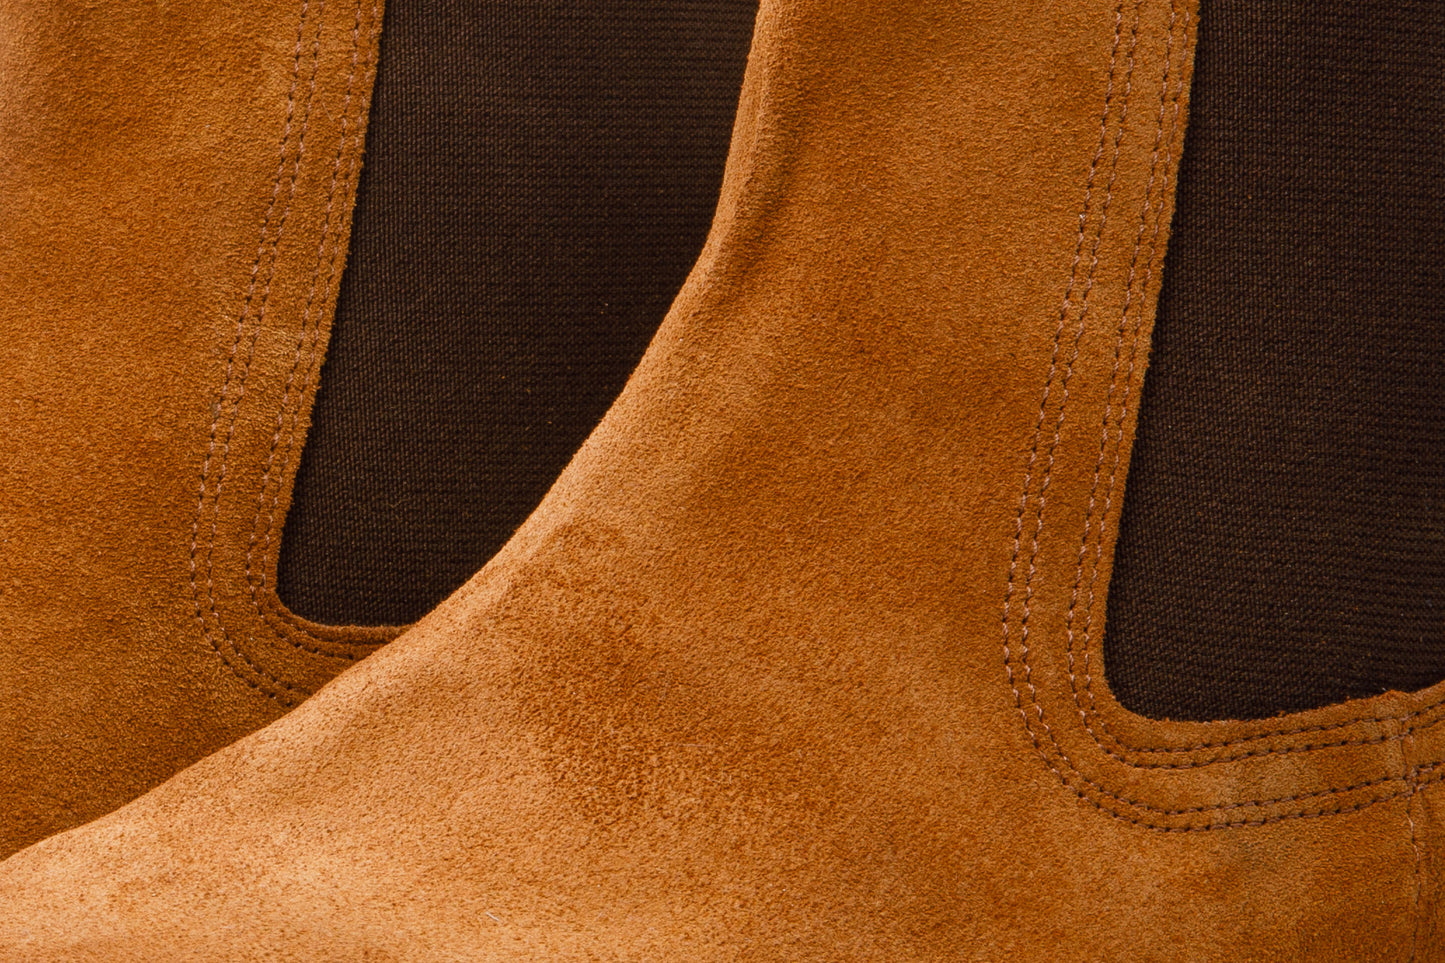 The Nayrobi Tan Suede Leather Chelsea Casual Men Boot  Final Sale!